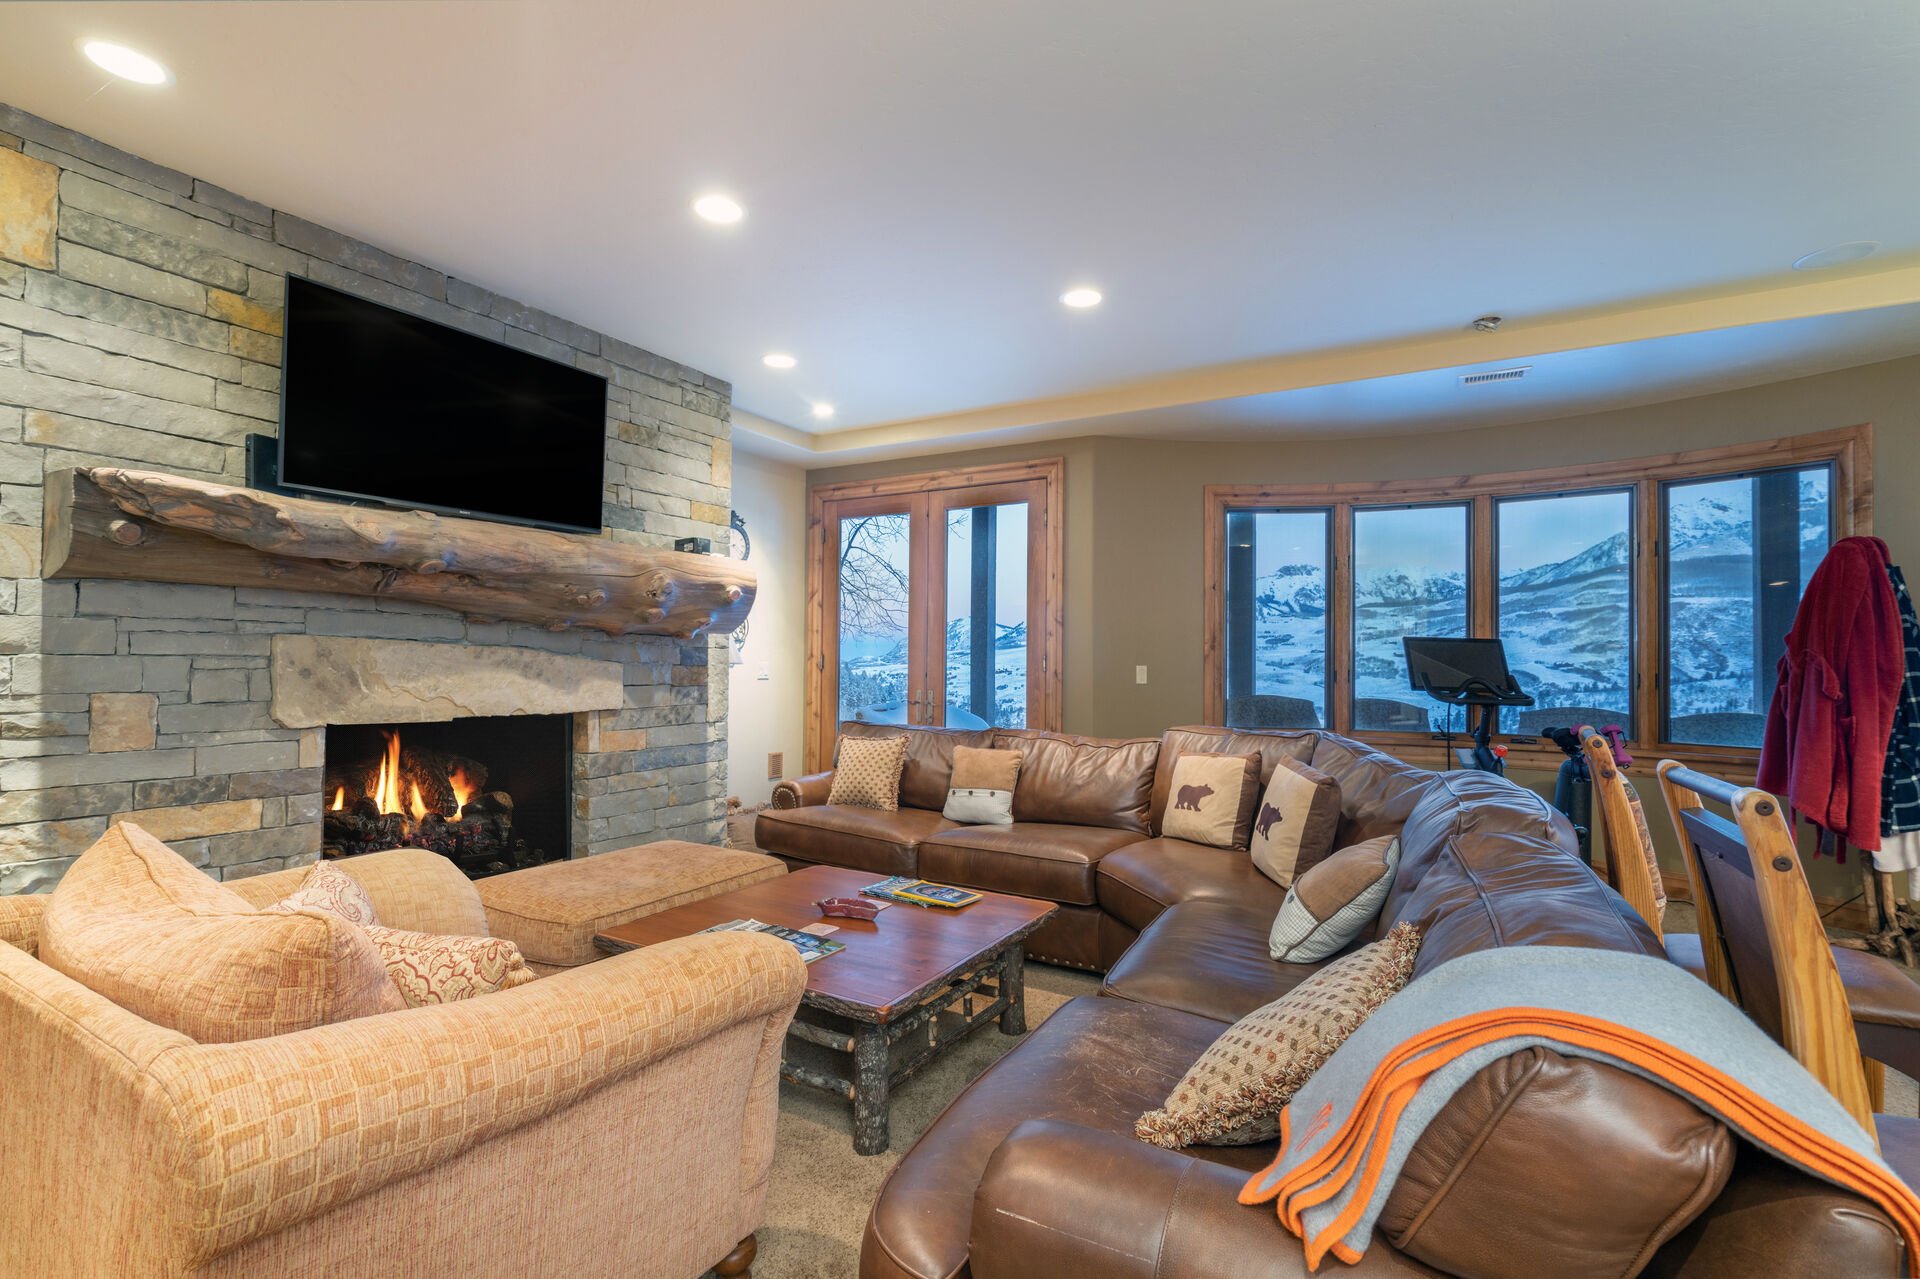 The living area of this Telluride golf rental is complete with a long sectional couch, armchair, fireplace, and TV.